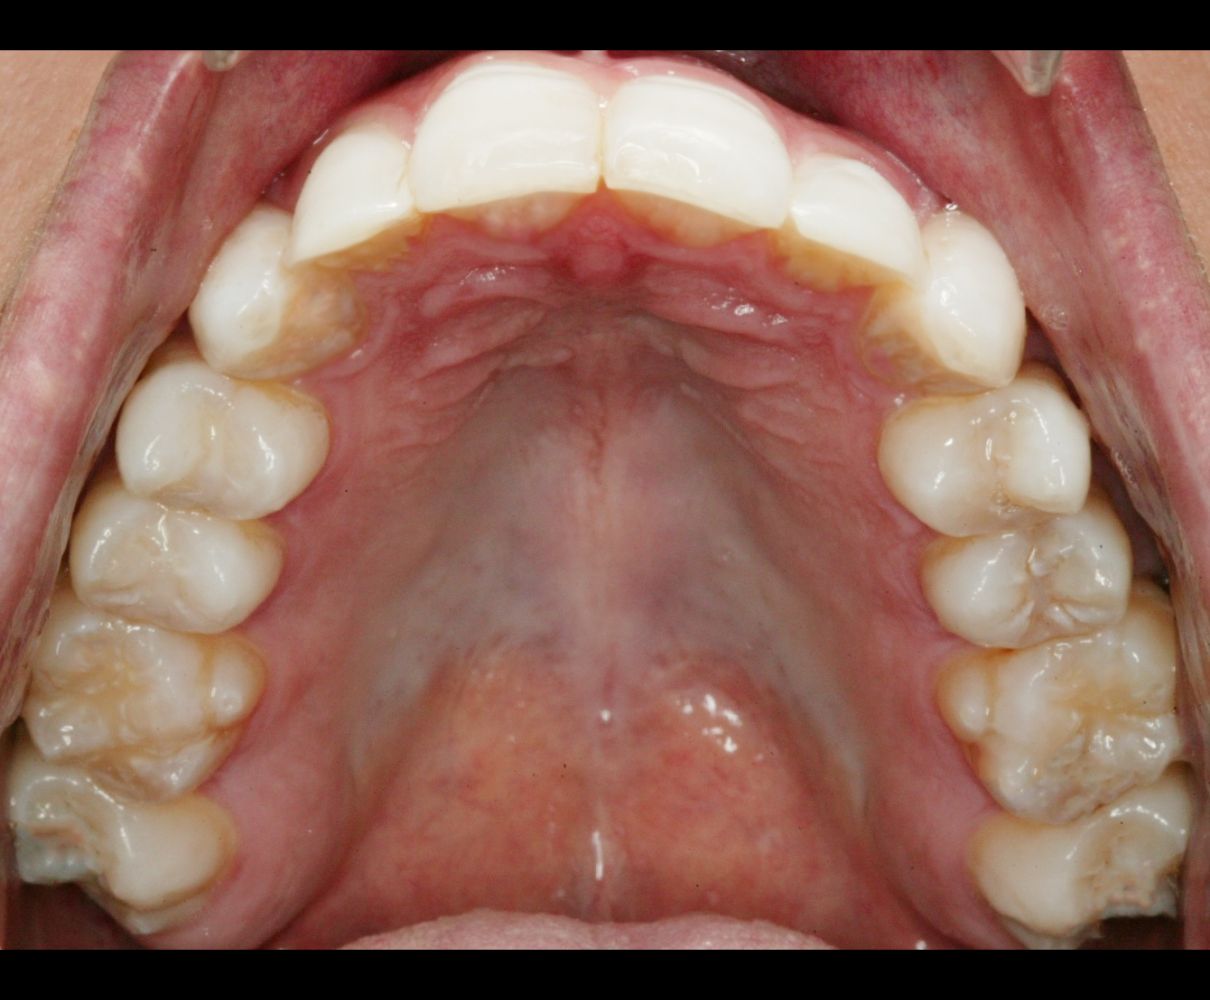 After orthodontic treatment